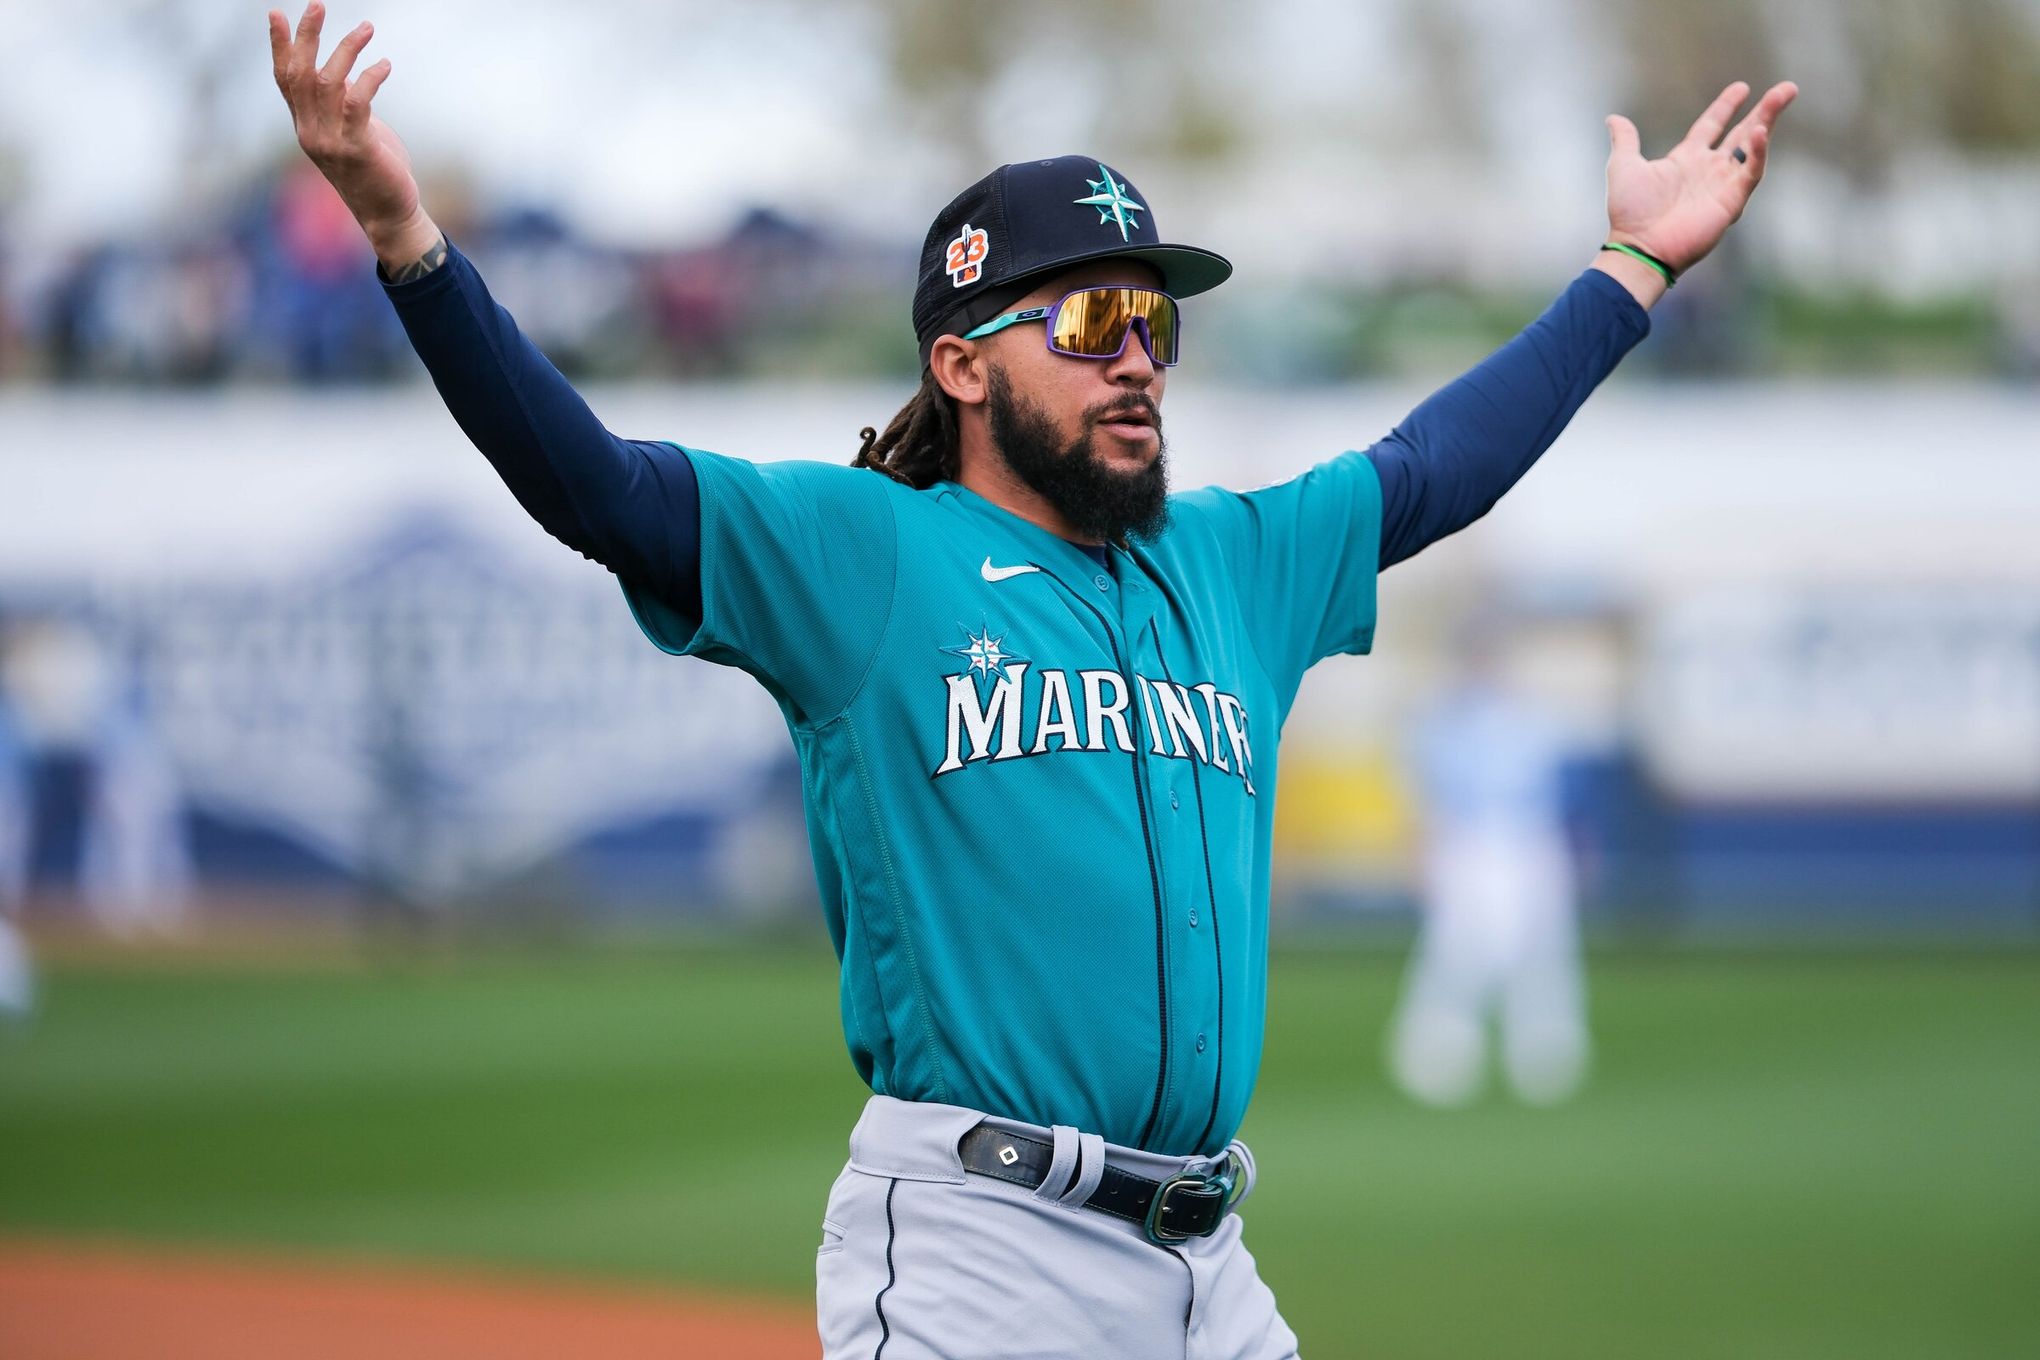 Seattle Mariners at 2023 Spring Training